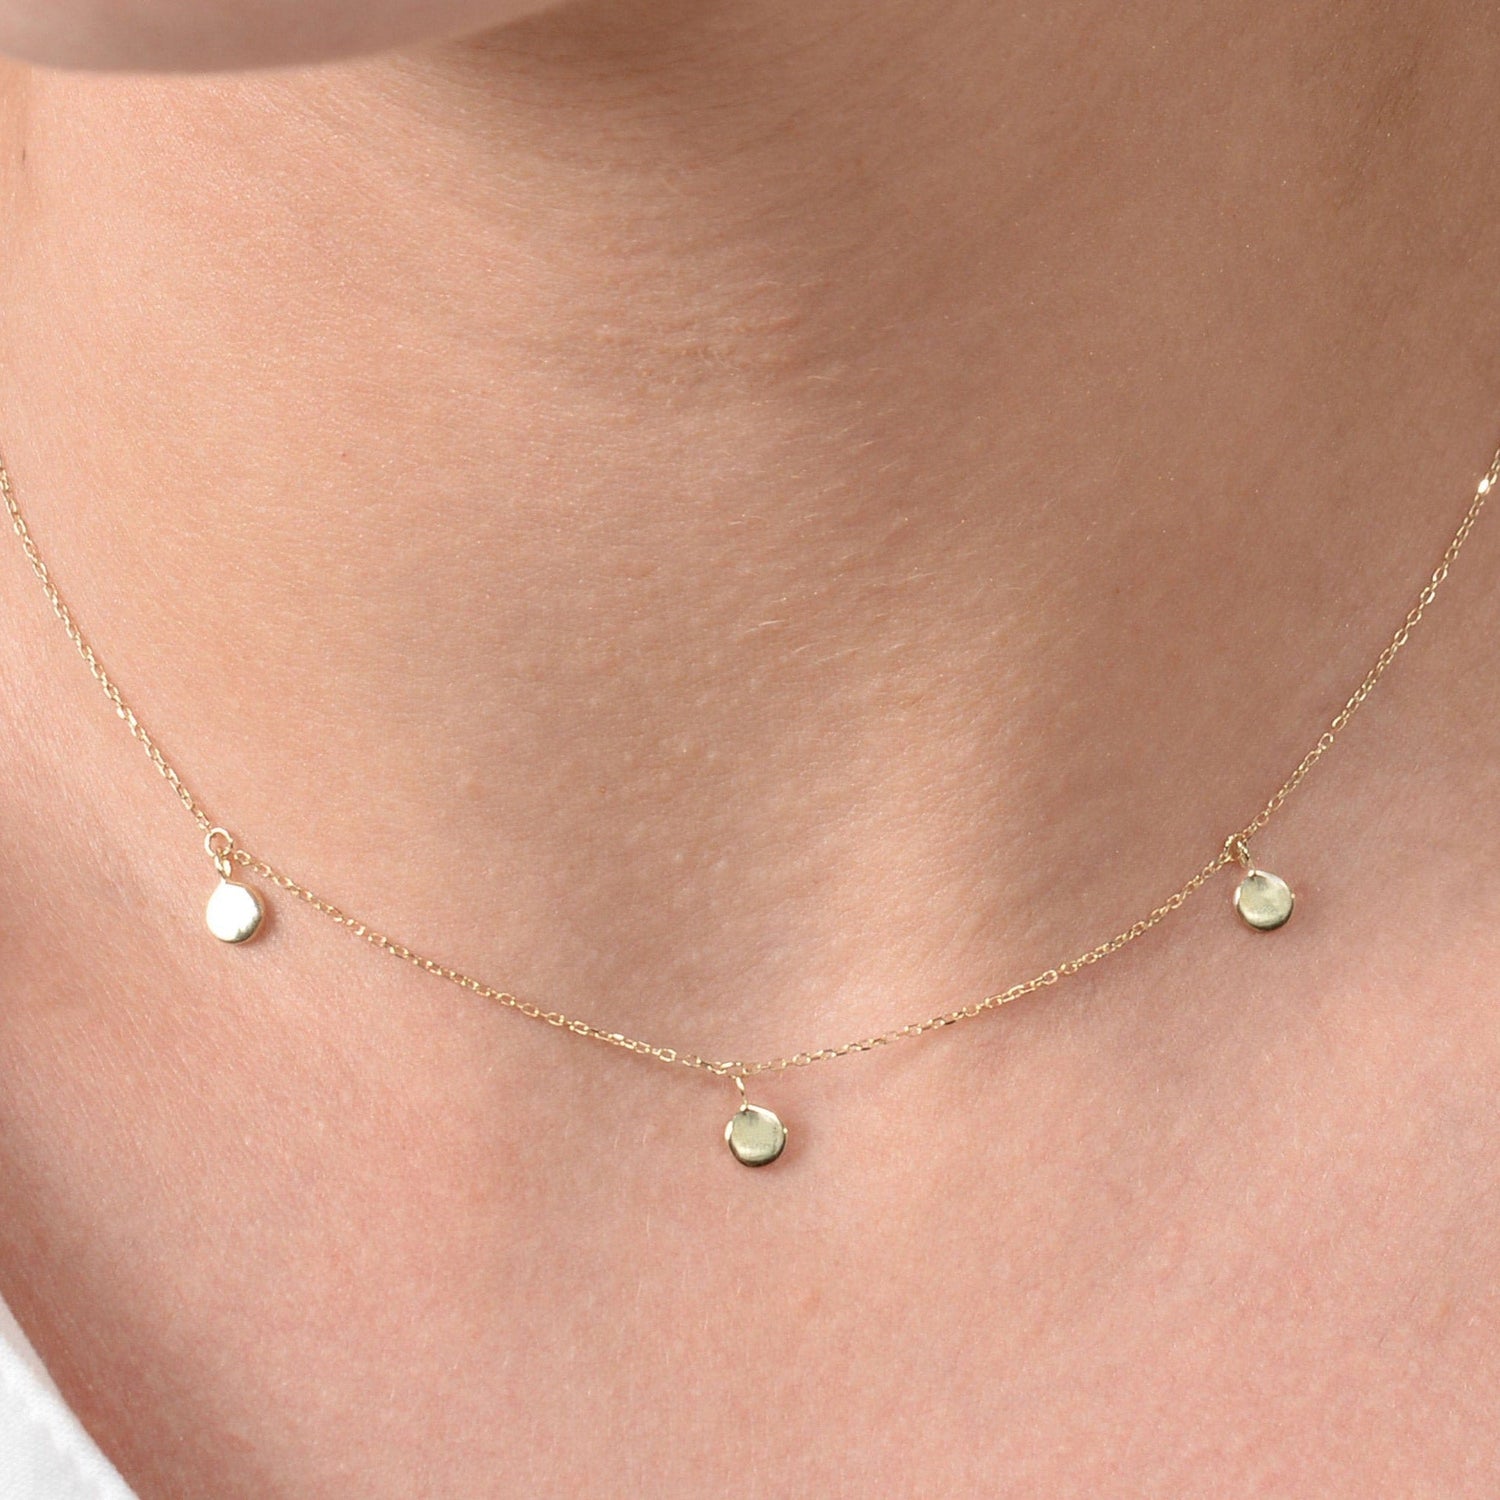 Coin Necklace / Mini Disc Necklace / Gold Coin Necklace / Medallion Necklace / Minimalist Necklace / Dainty Coin Pendant / Everyday Jewelry